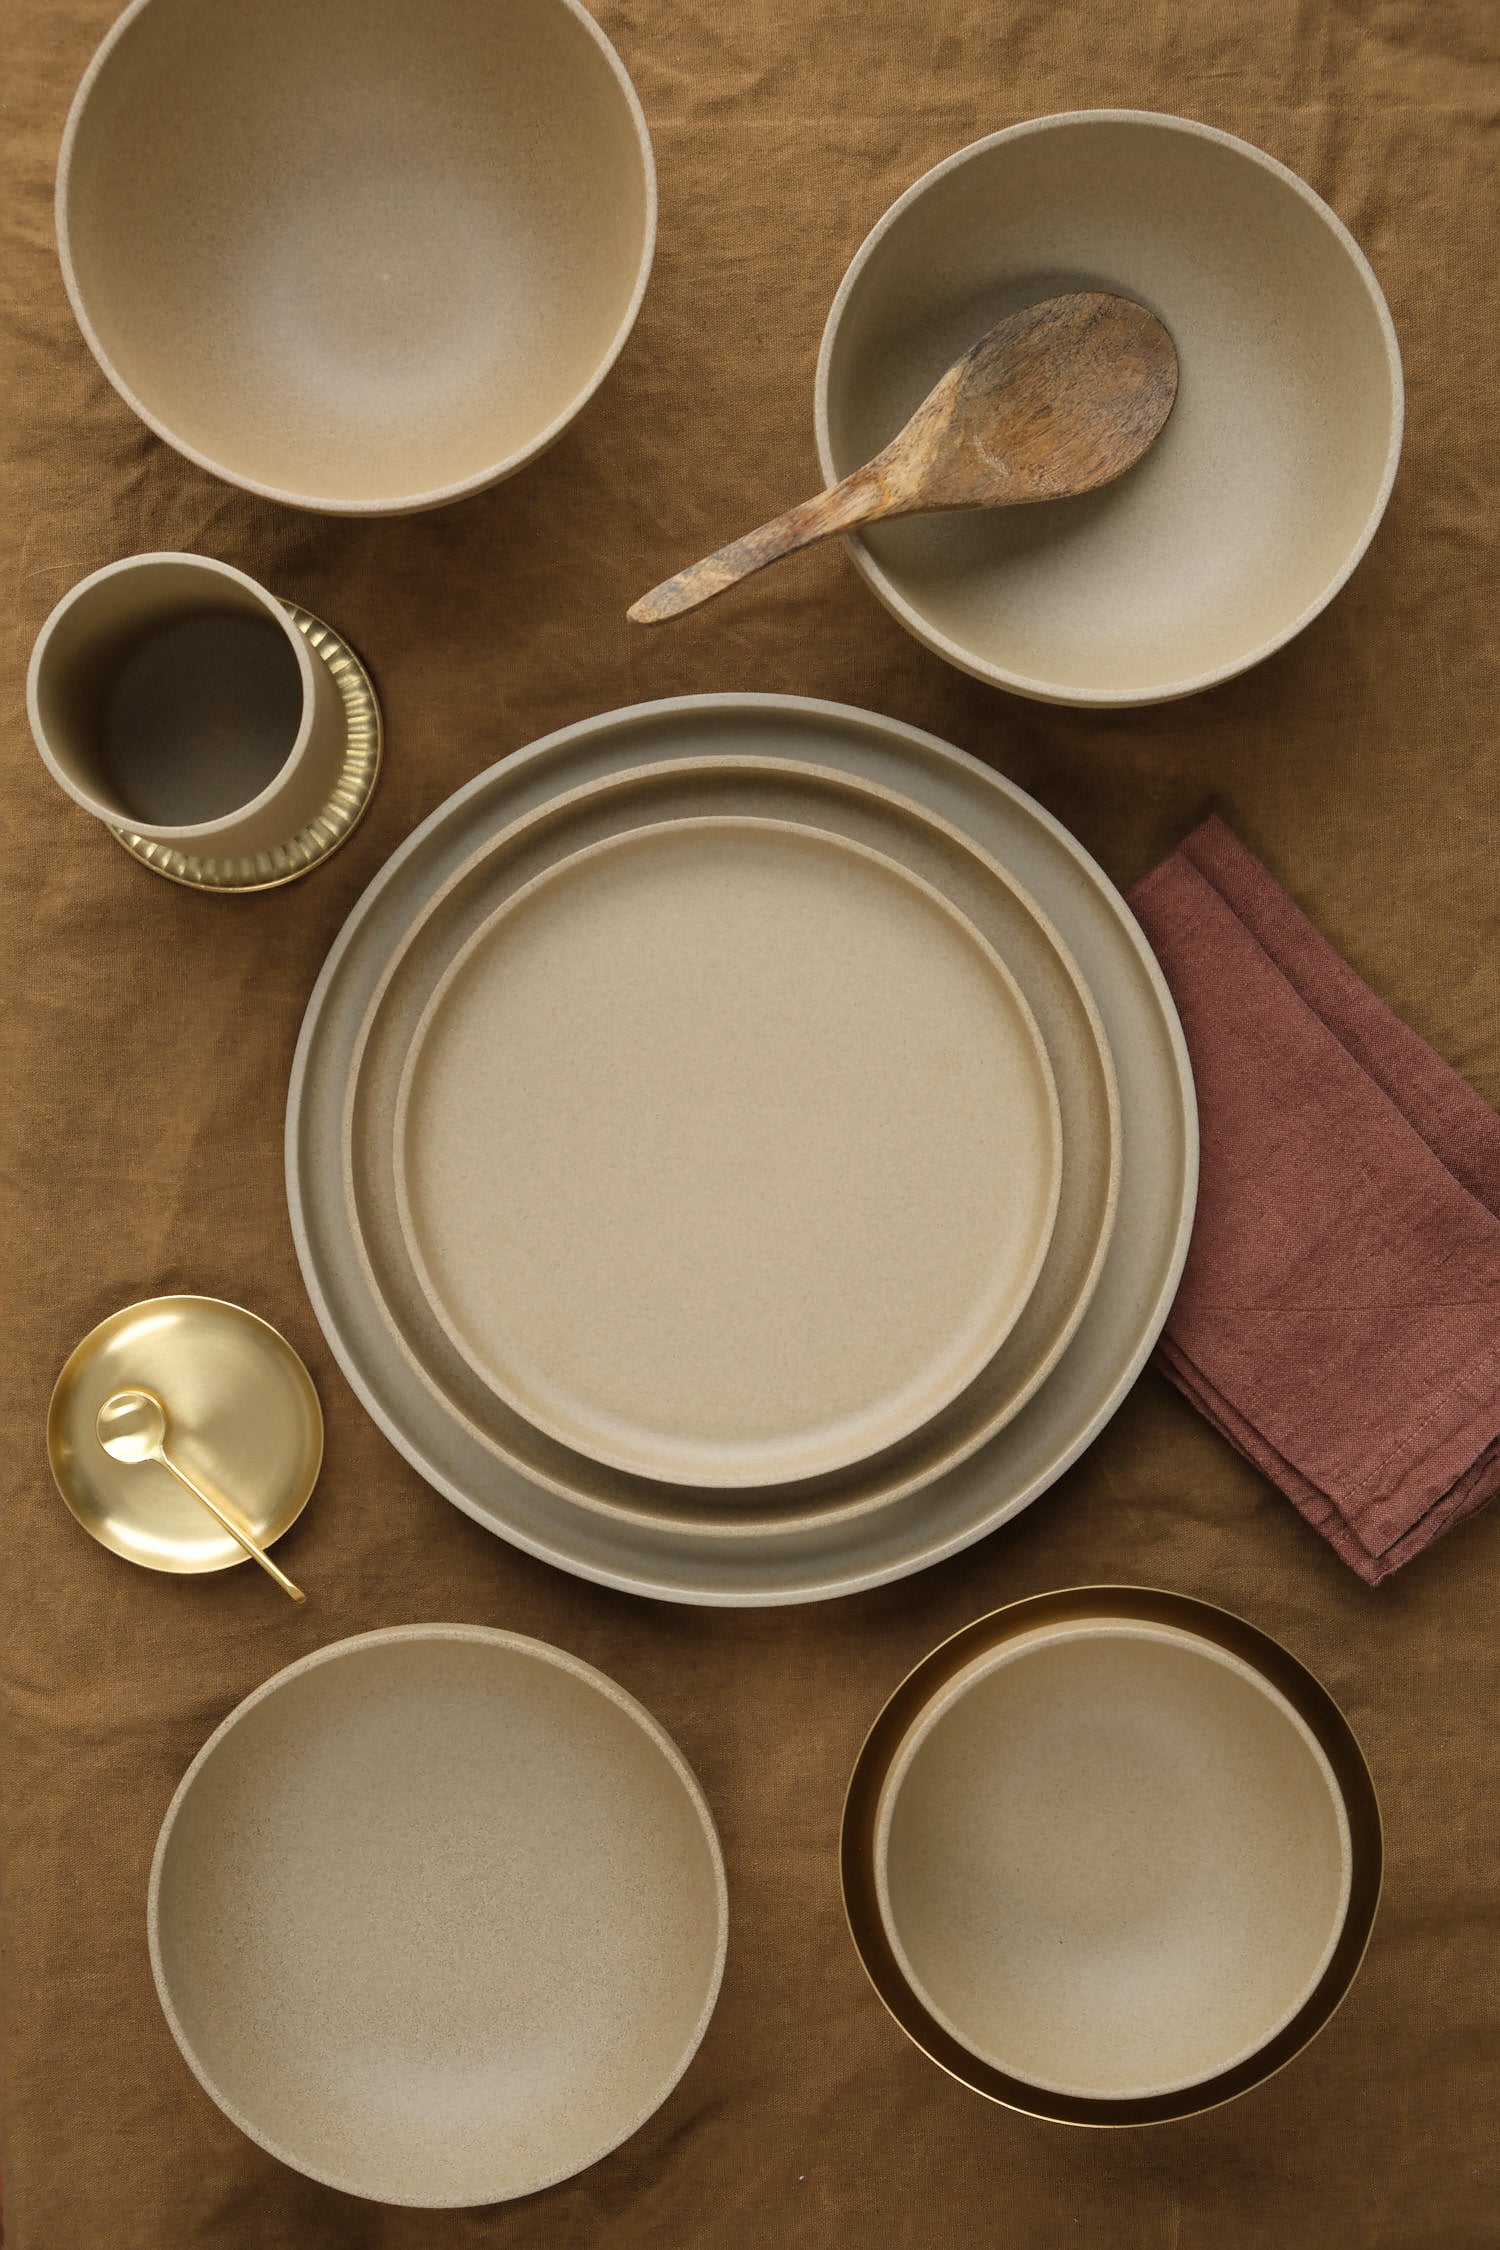 Hasami Porcelain plates and bowls in stock